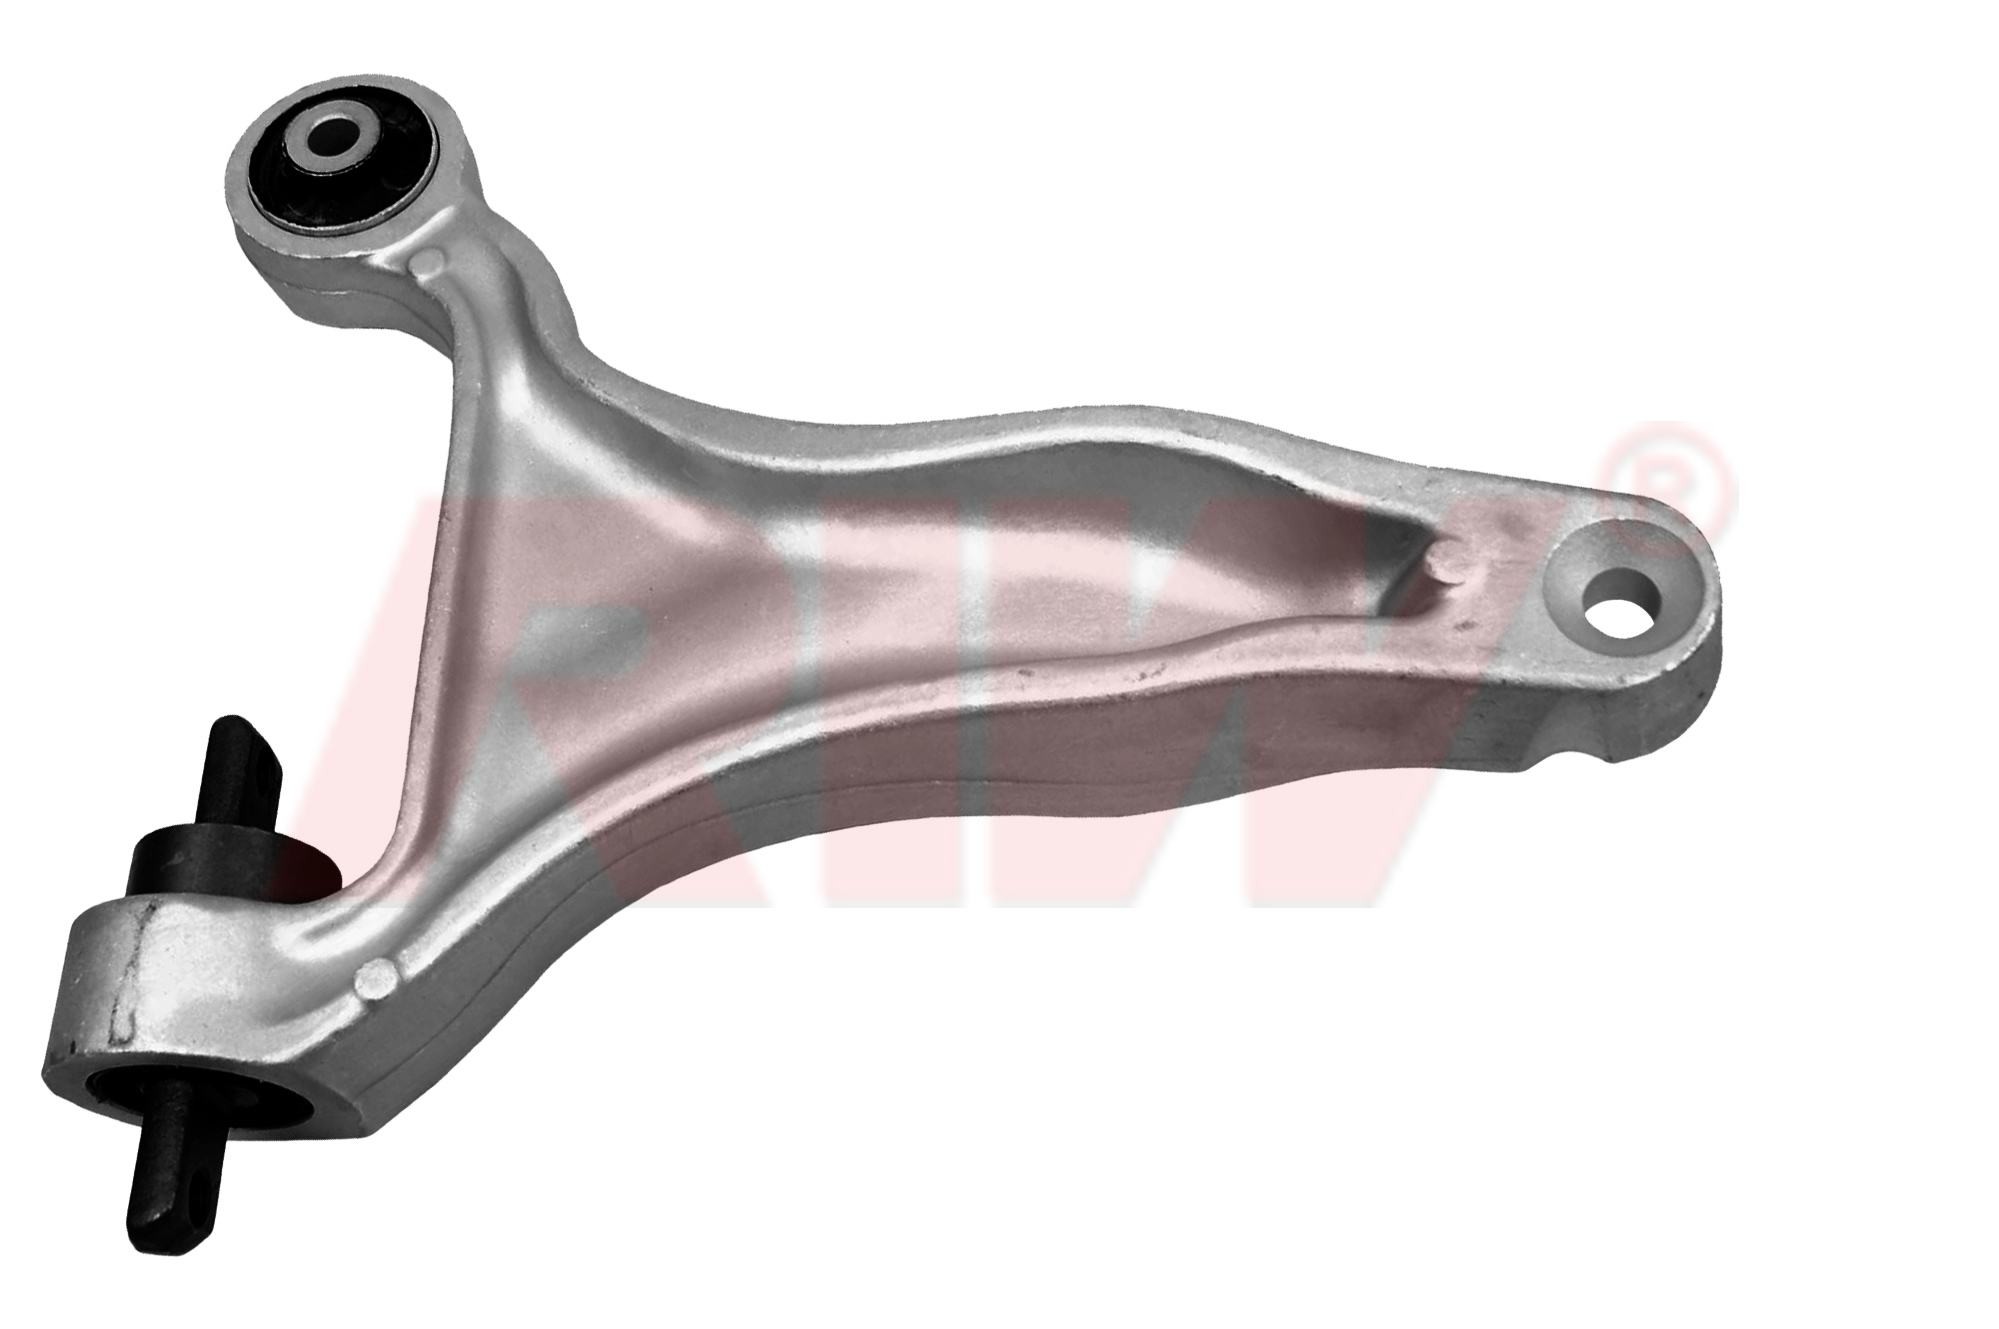 VOLVO XC70 CROSS COUNTRY (II CROSS COUNTRY) 2000 - 2007 Control Arm